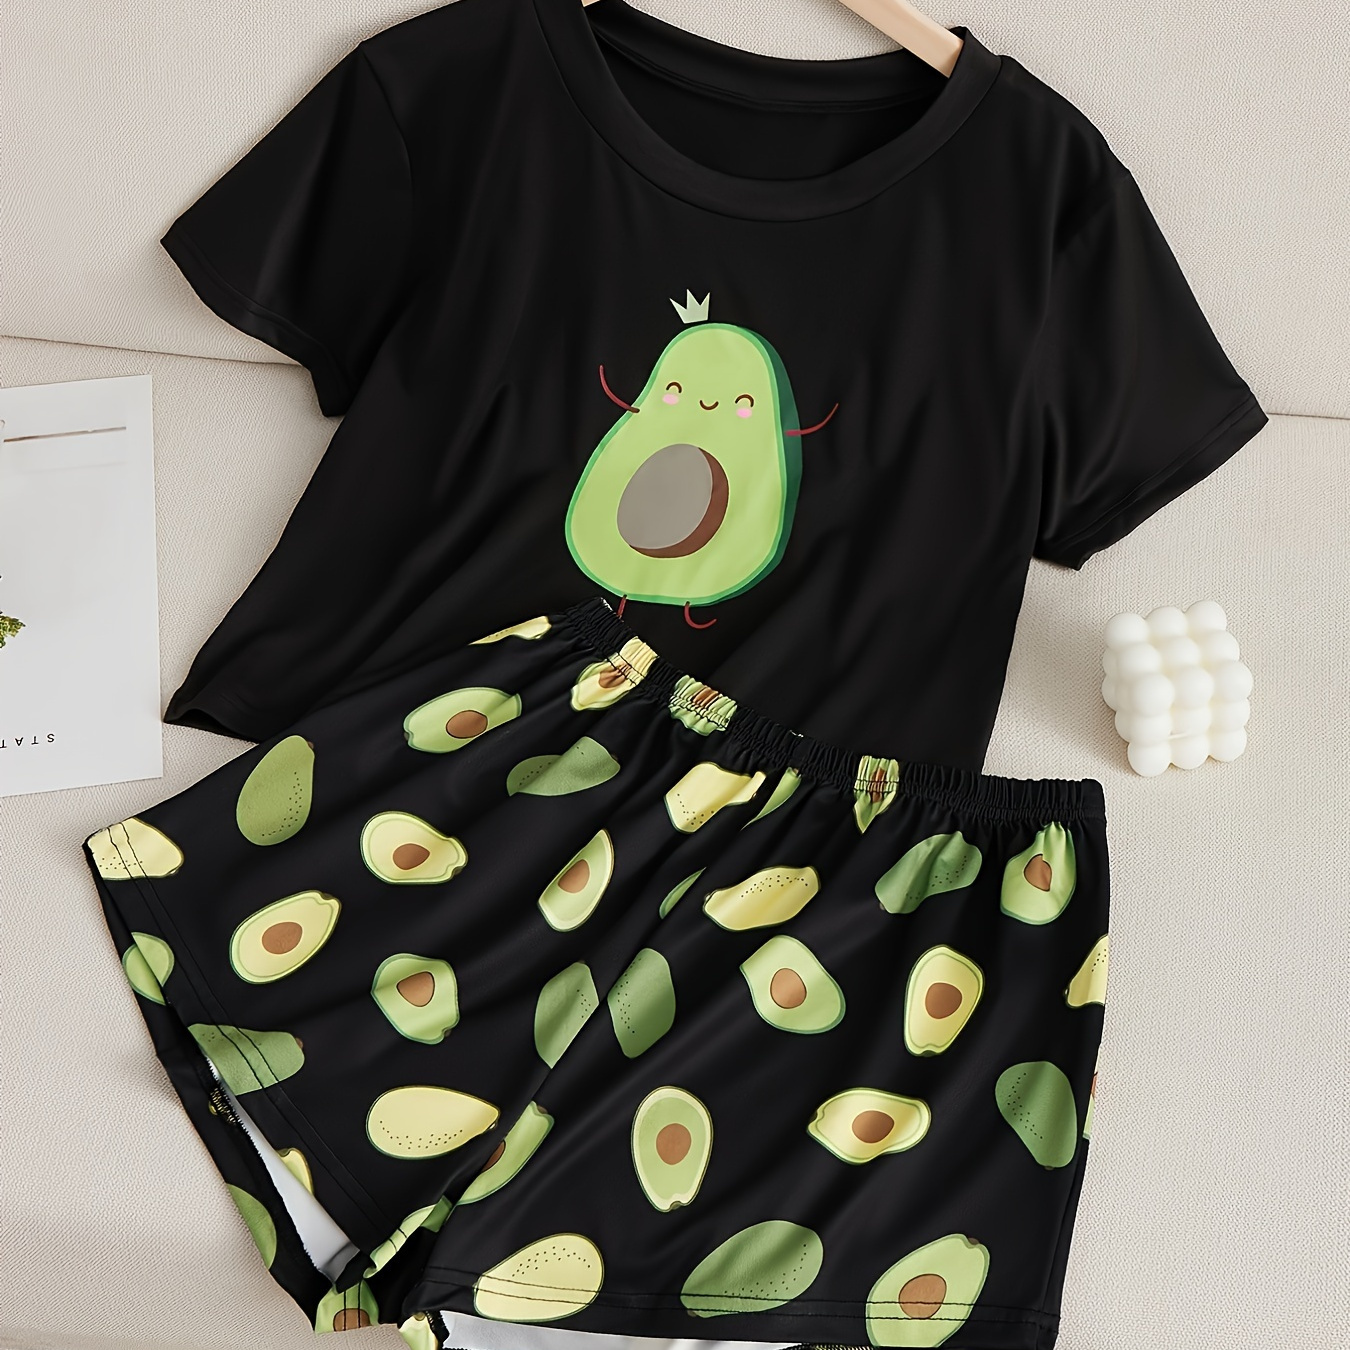 

Women's Cute Avocado Print Pajama Set, Short Sleeve Round Neck Top & Shorts, Comfortable Relaxed Fit